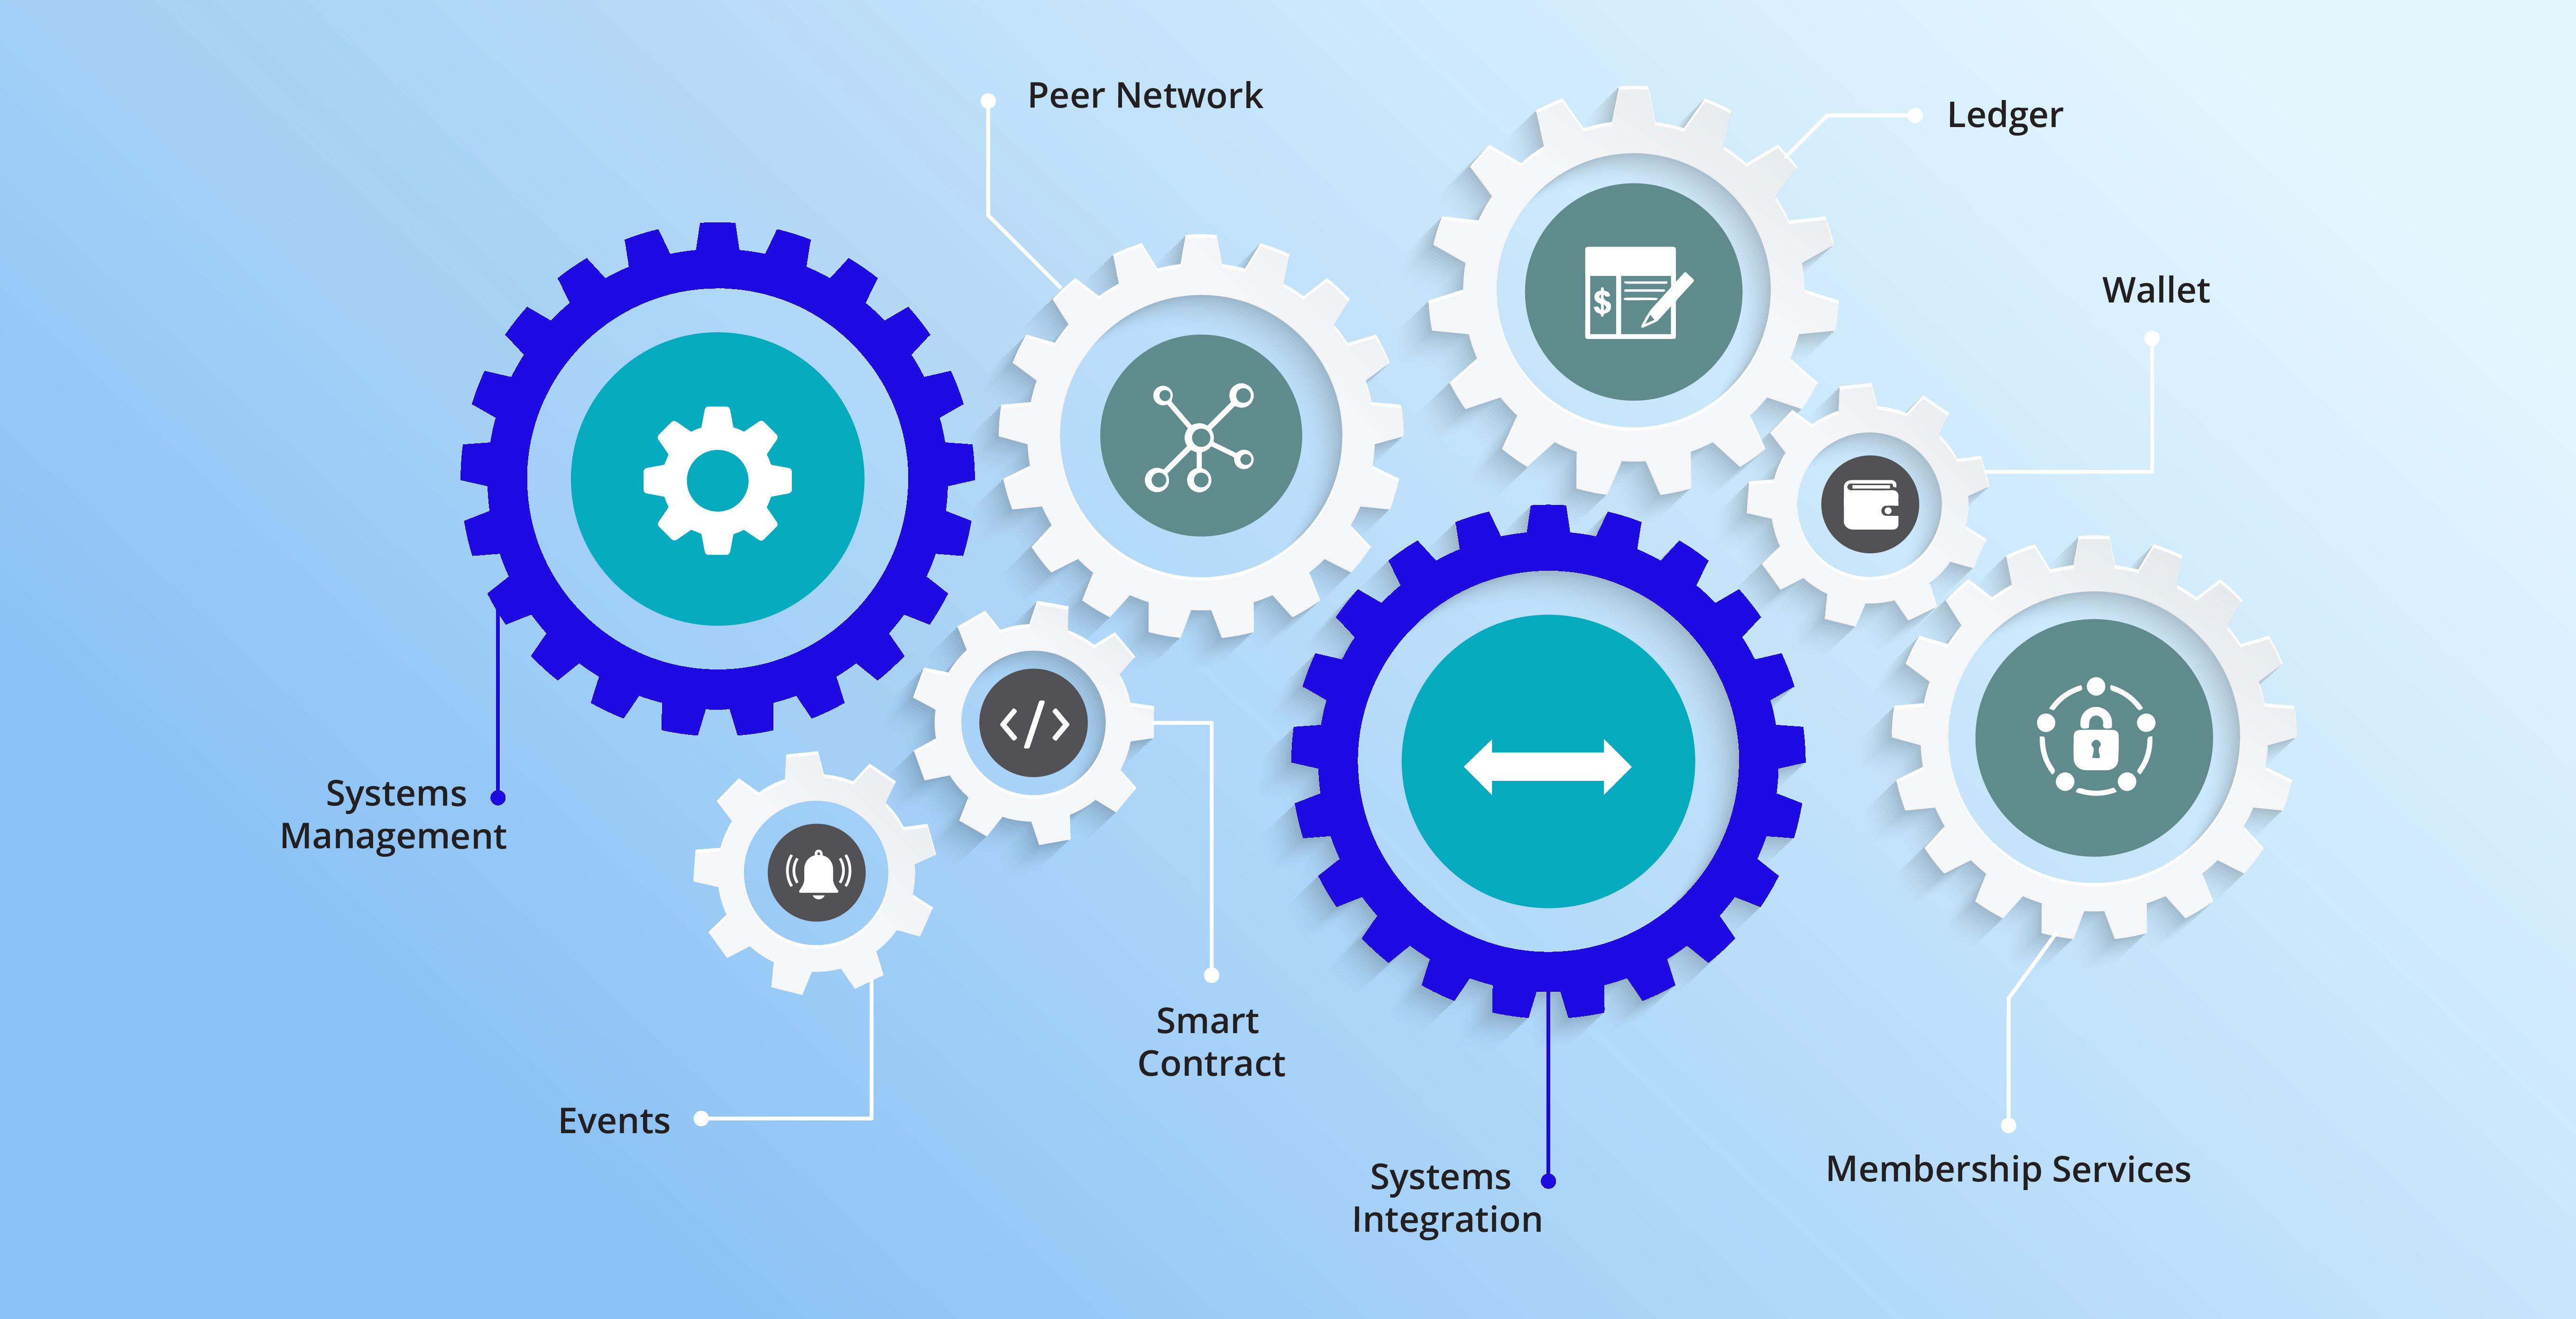 what is systems integration used for in blockchain